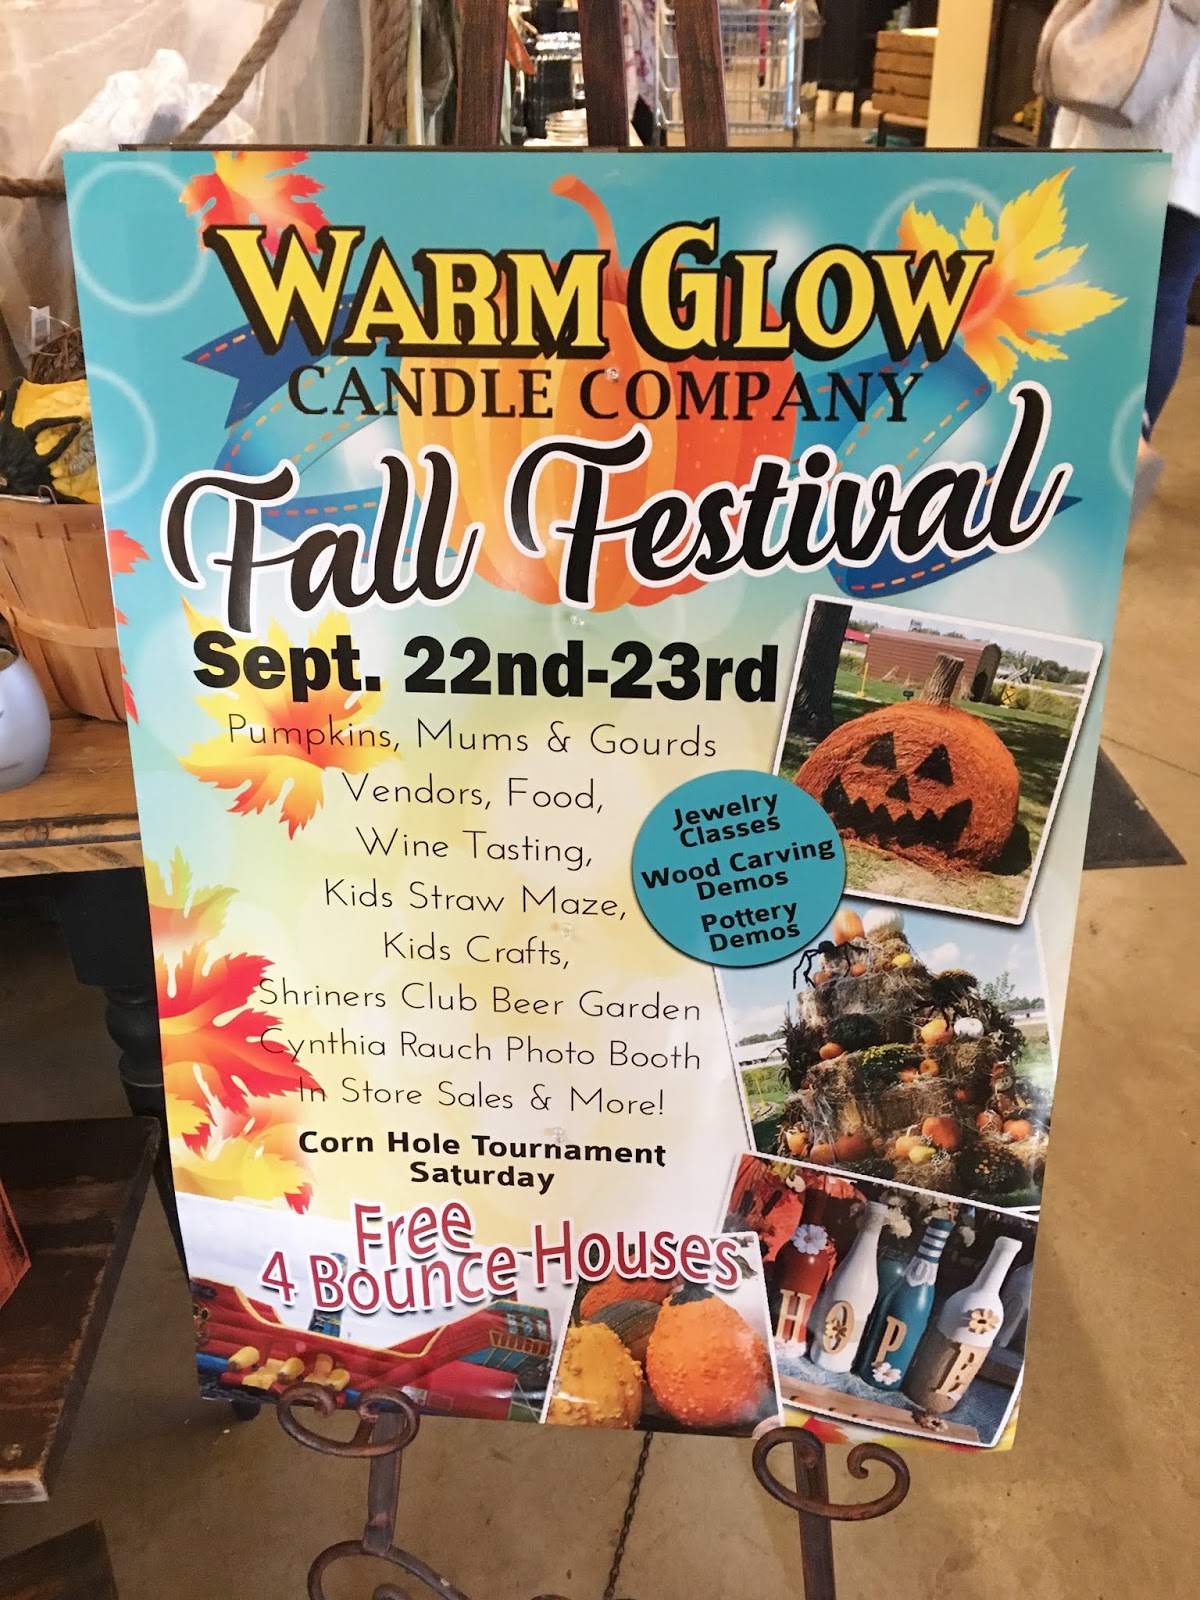 Warm Glow Candle Company Fall Festival Centerville, Indiana